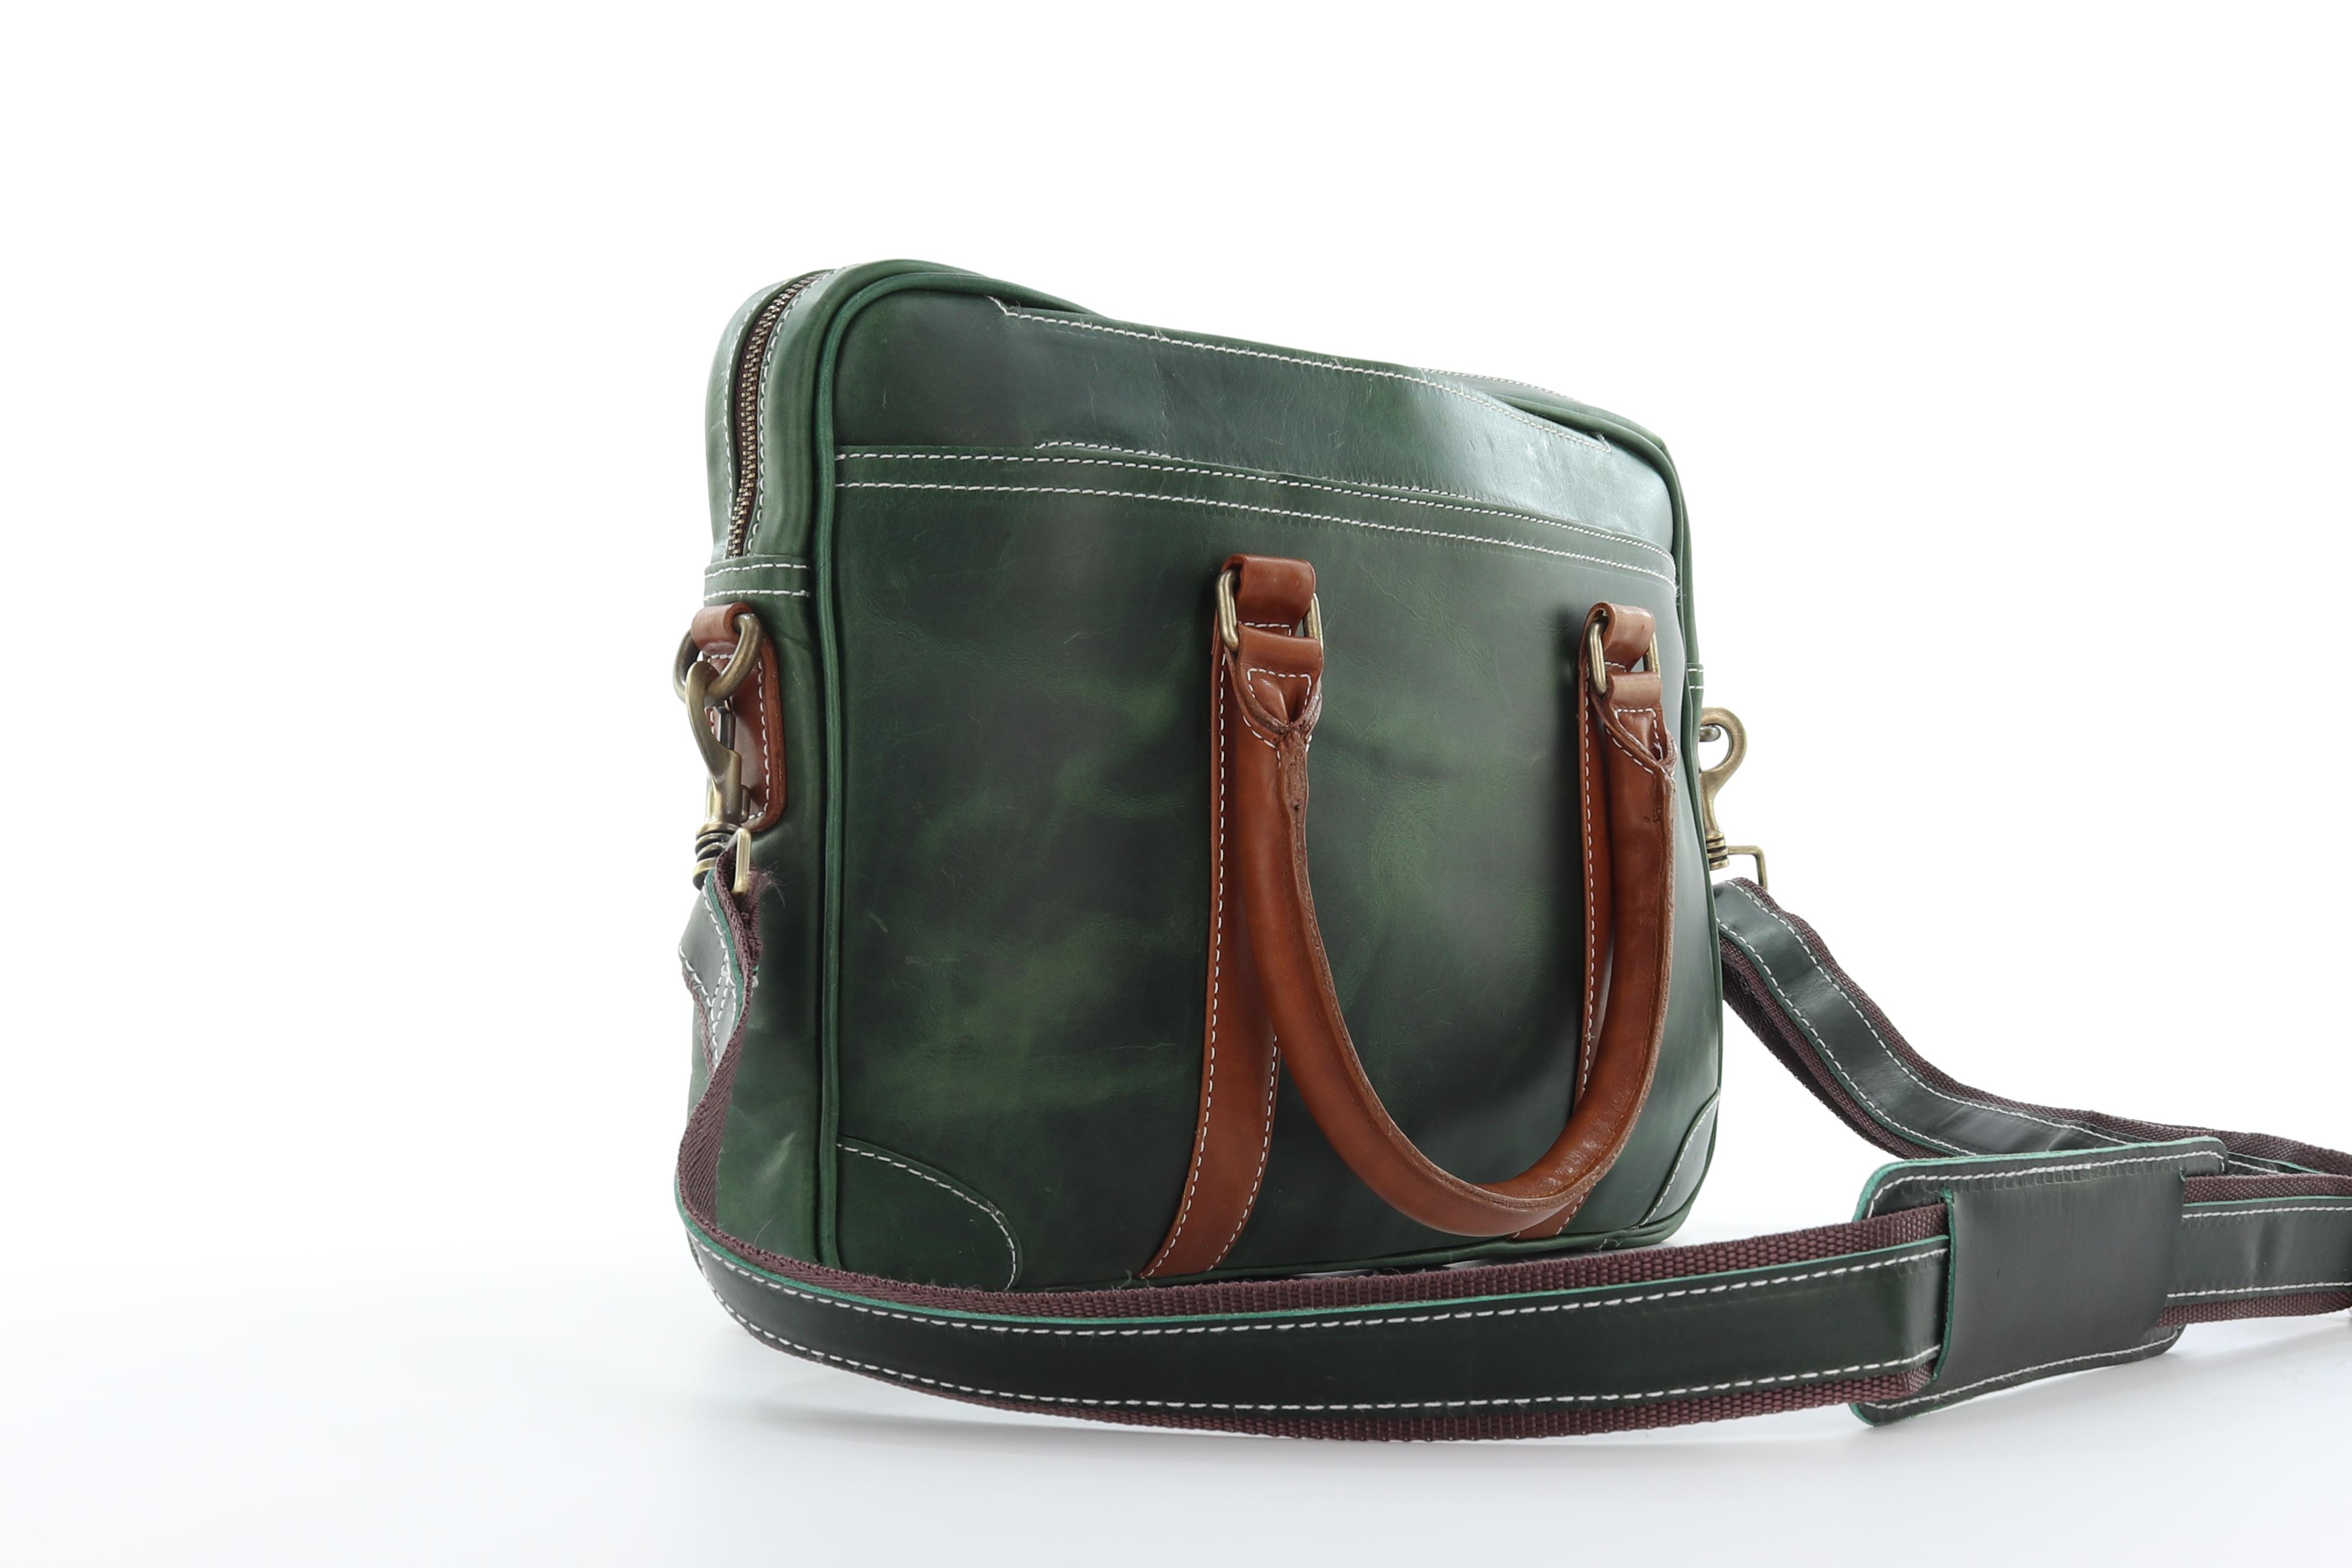 Haden Leather Bag - Laptop Bag - Green - Front view2